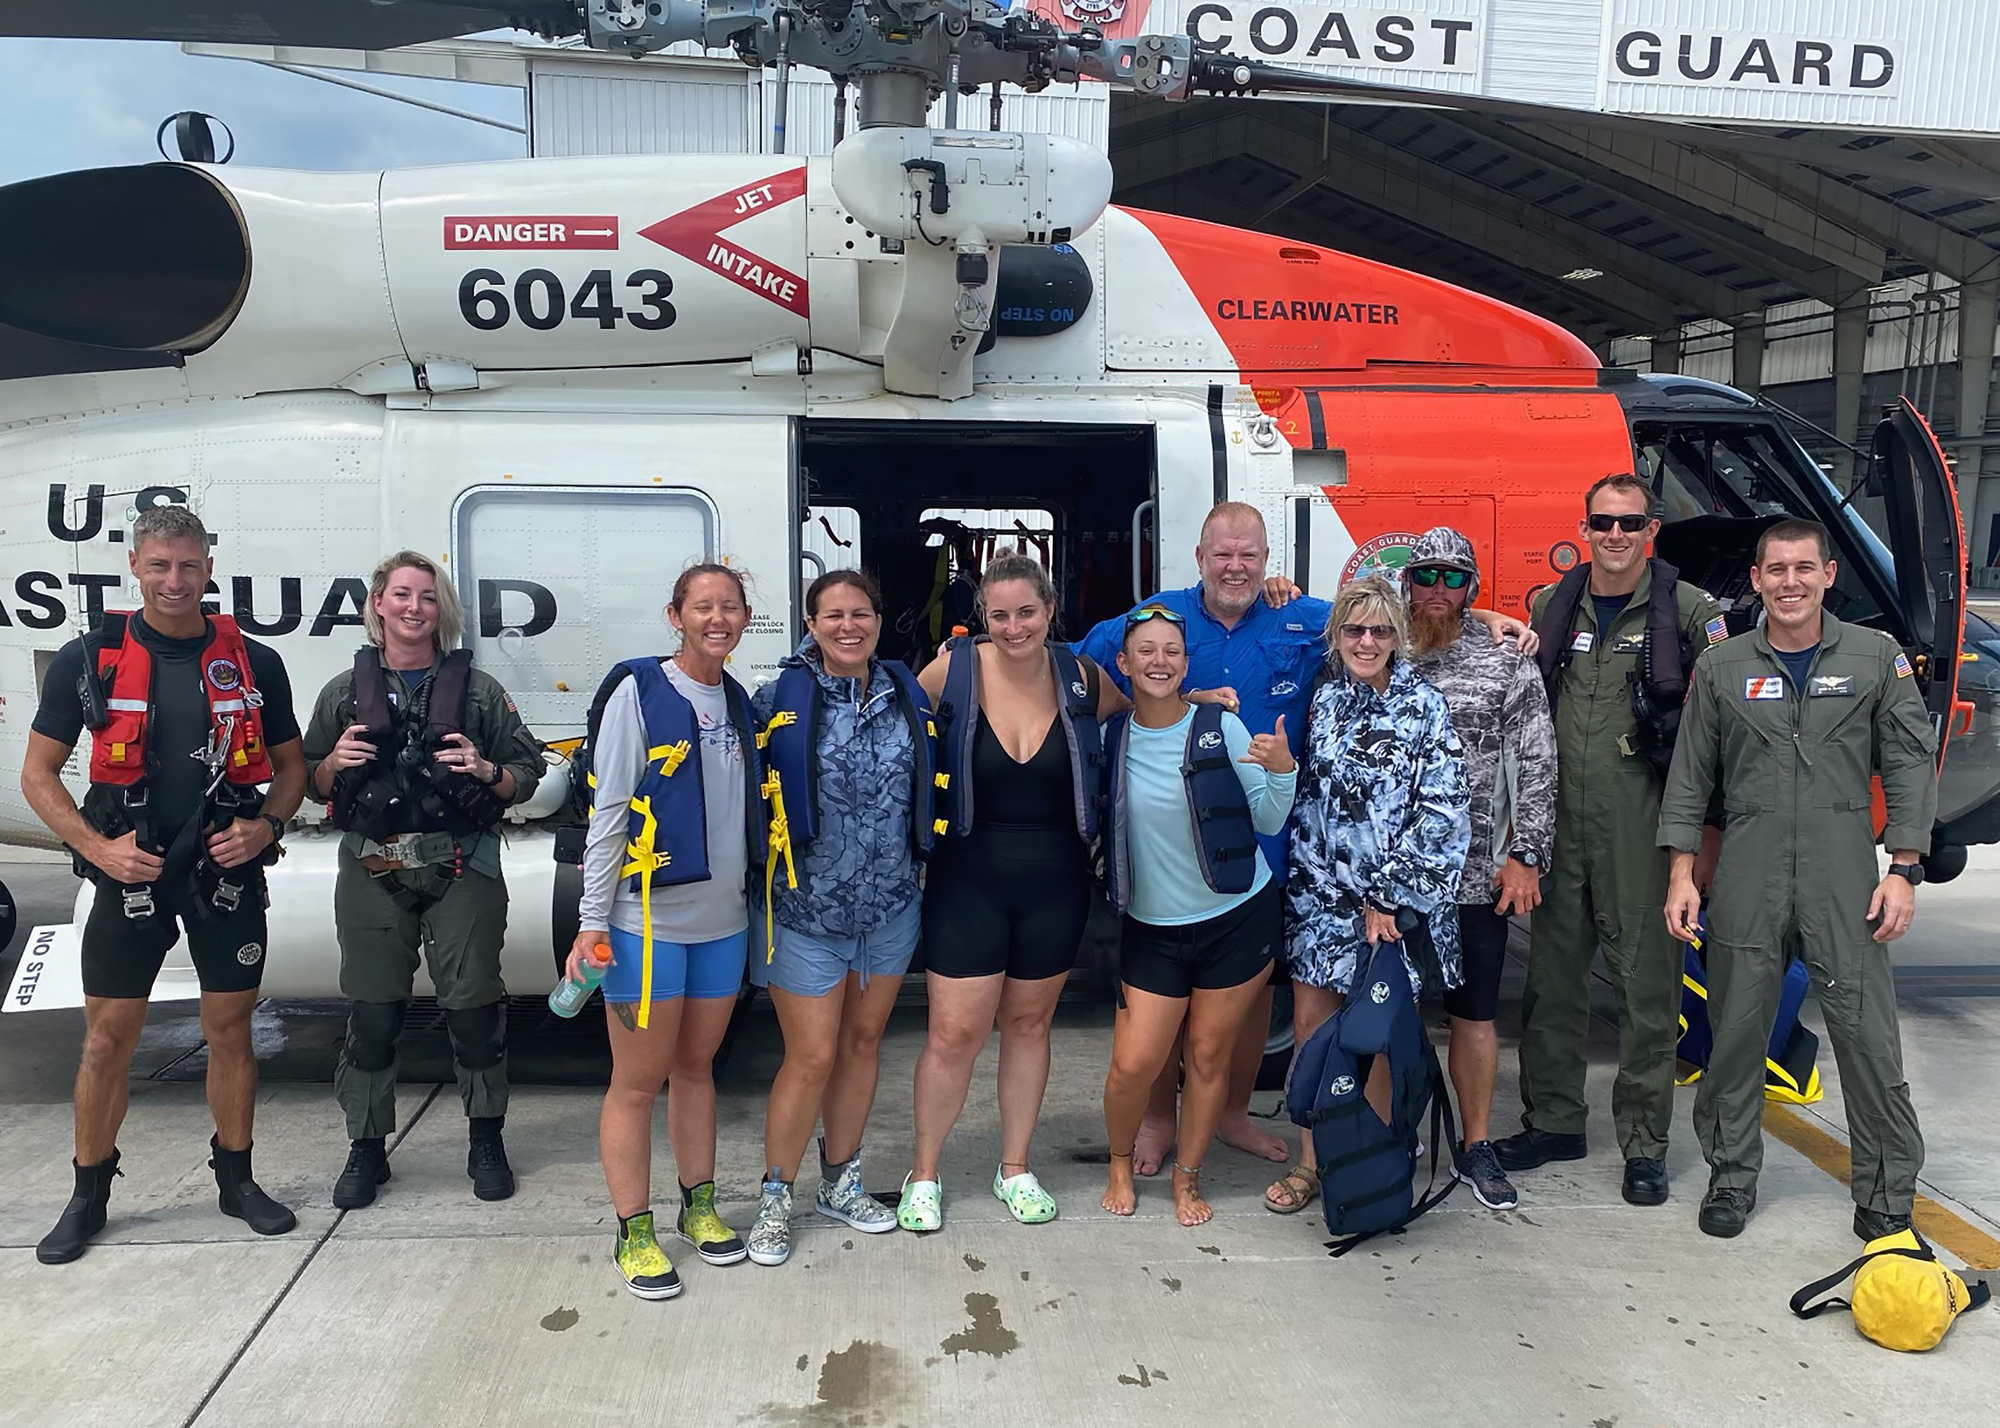 Coast Guard rescues 7 after lightning strike 100 miles off Clearwater